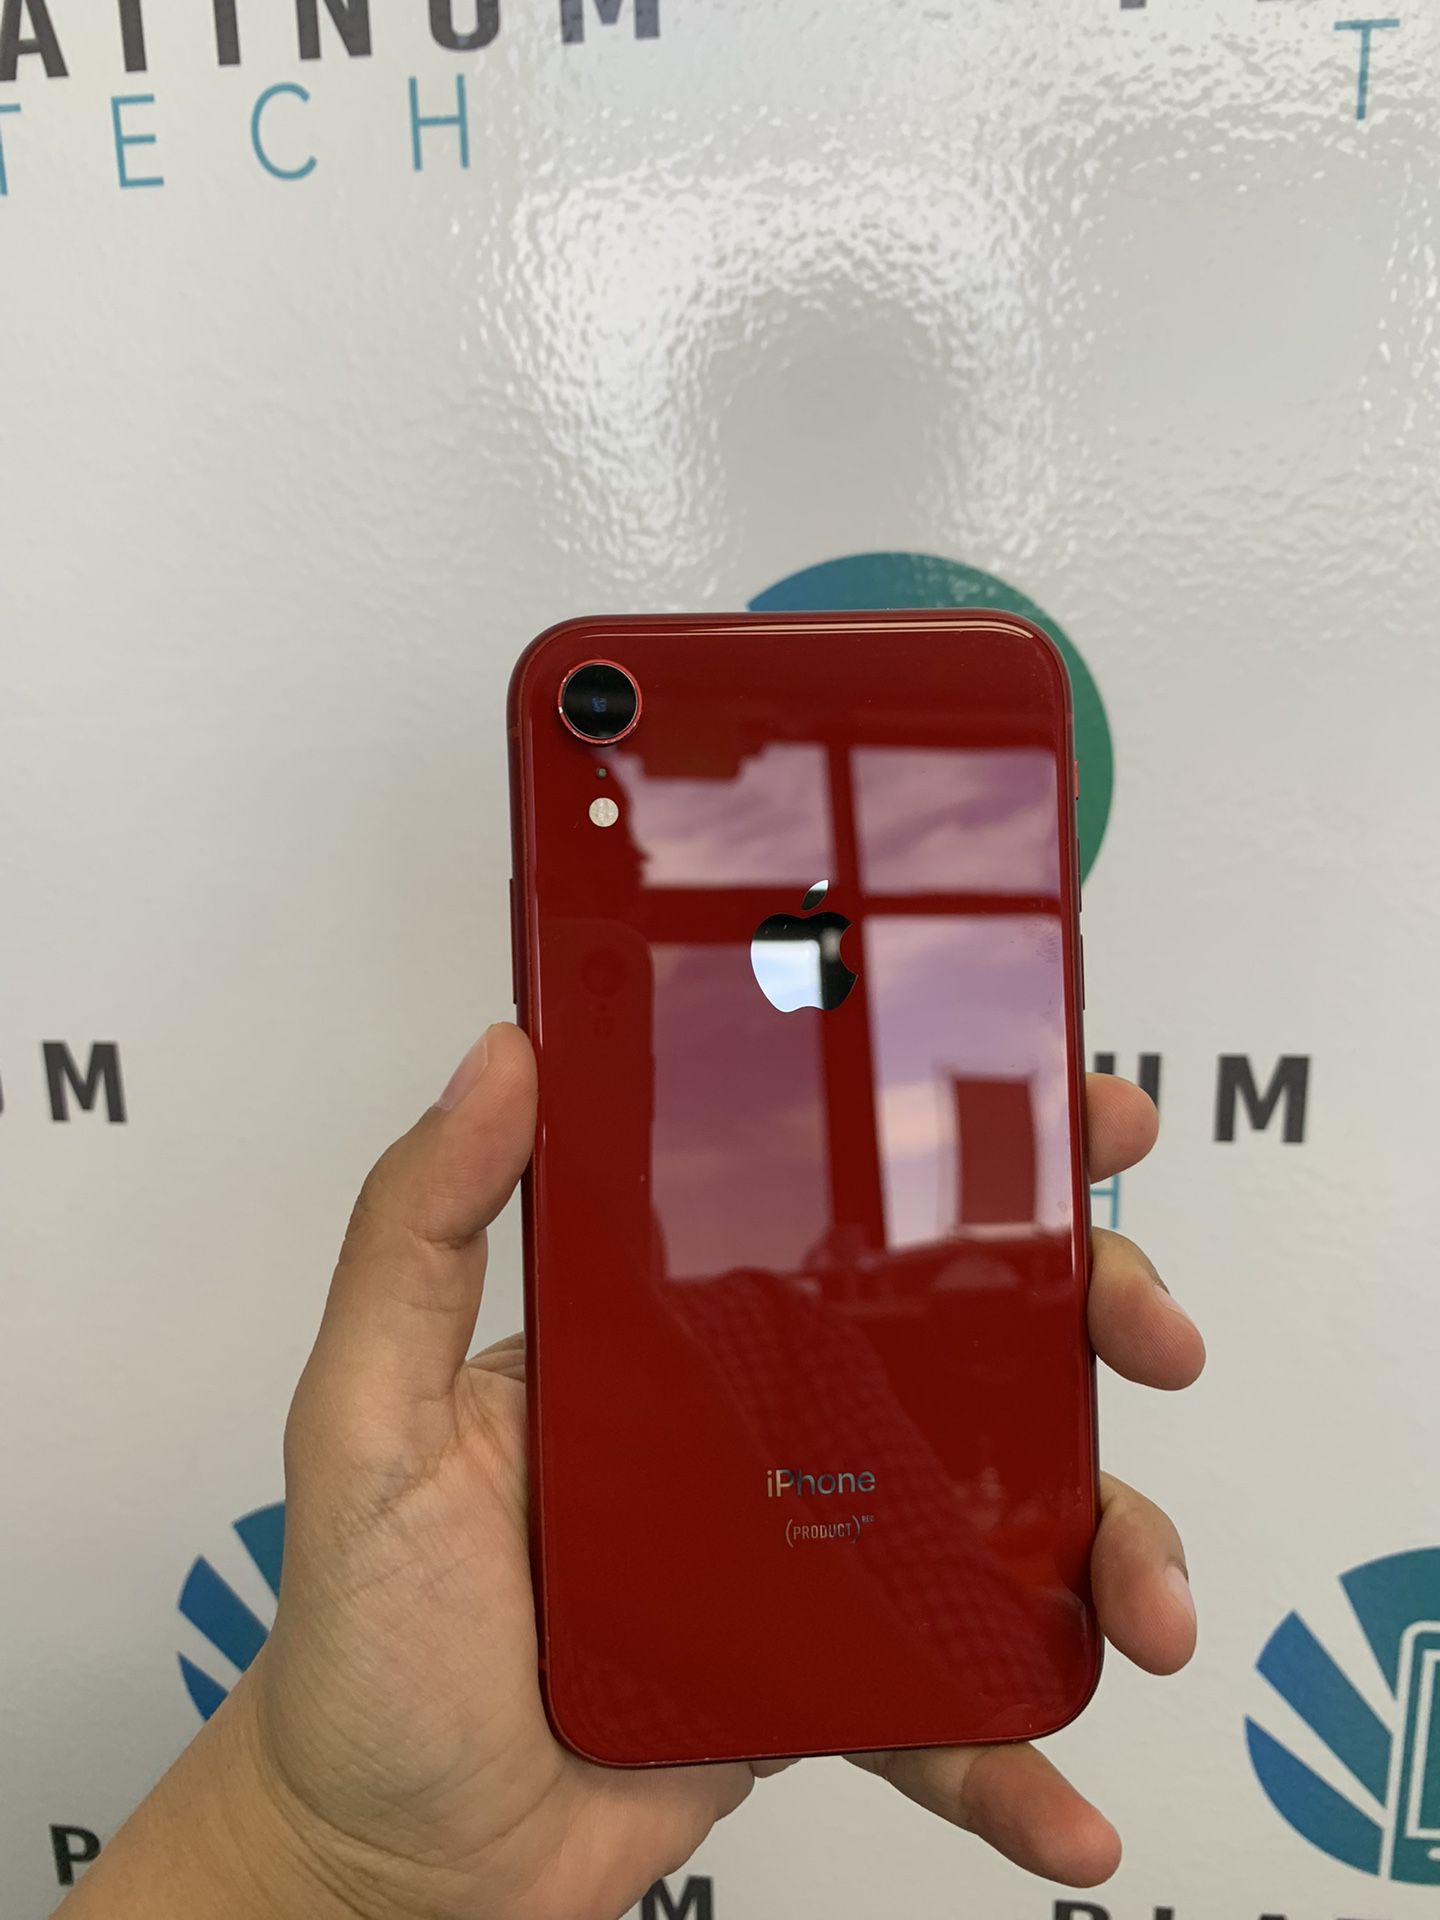 ❤️📱 iPhone XR 64 GB Unlocked BH81% 🔋 Case And Headphones For Free 💯👌🏻